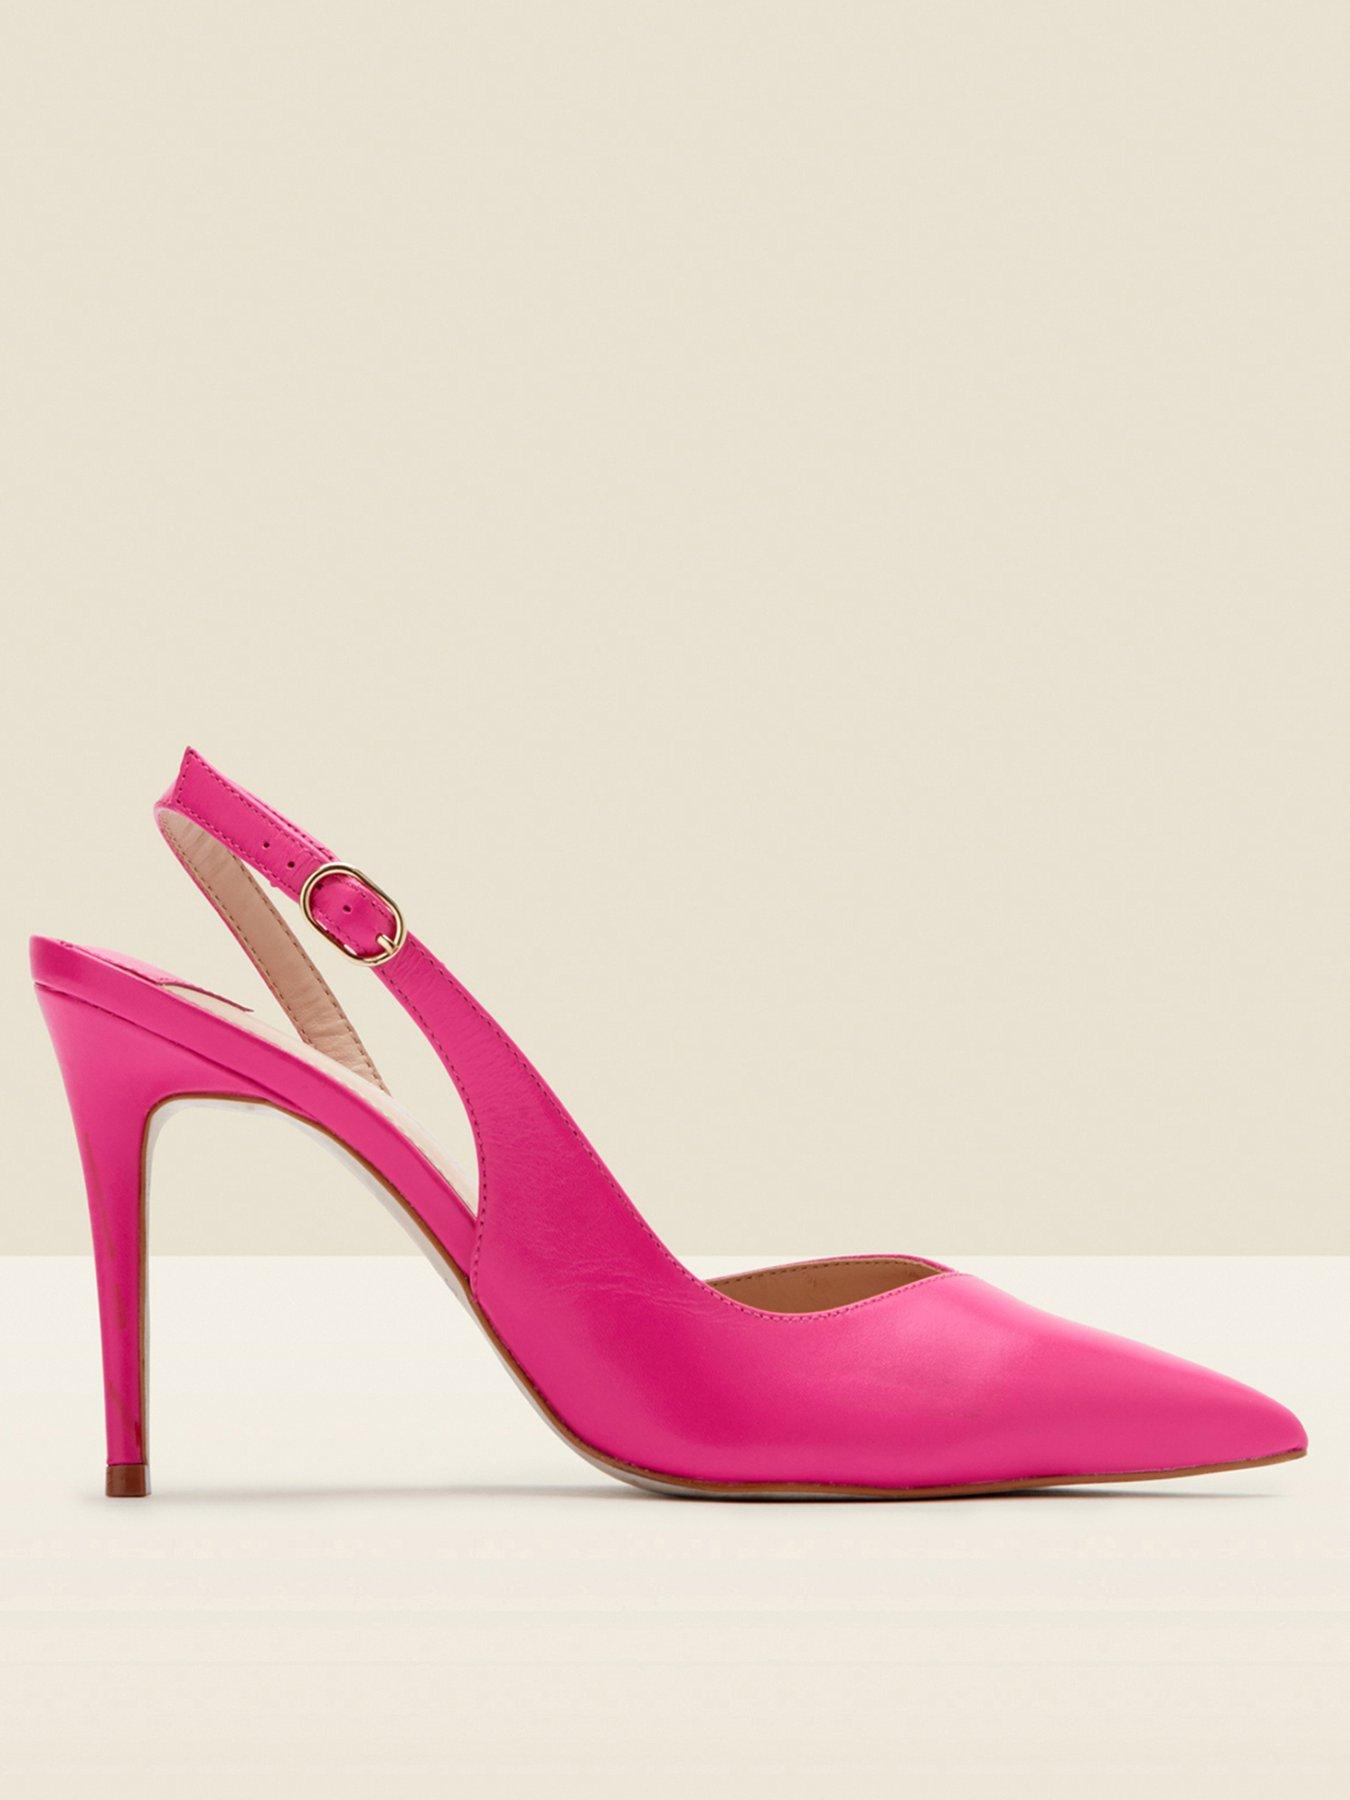 Details about   BARBIE PASTEL PINK STRAPPY HIGH HEEL SHOES 